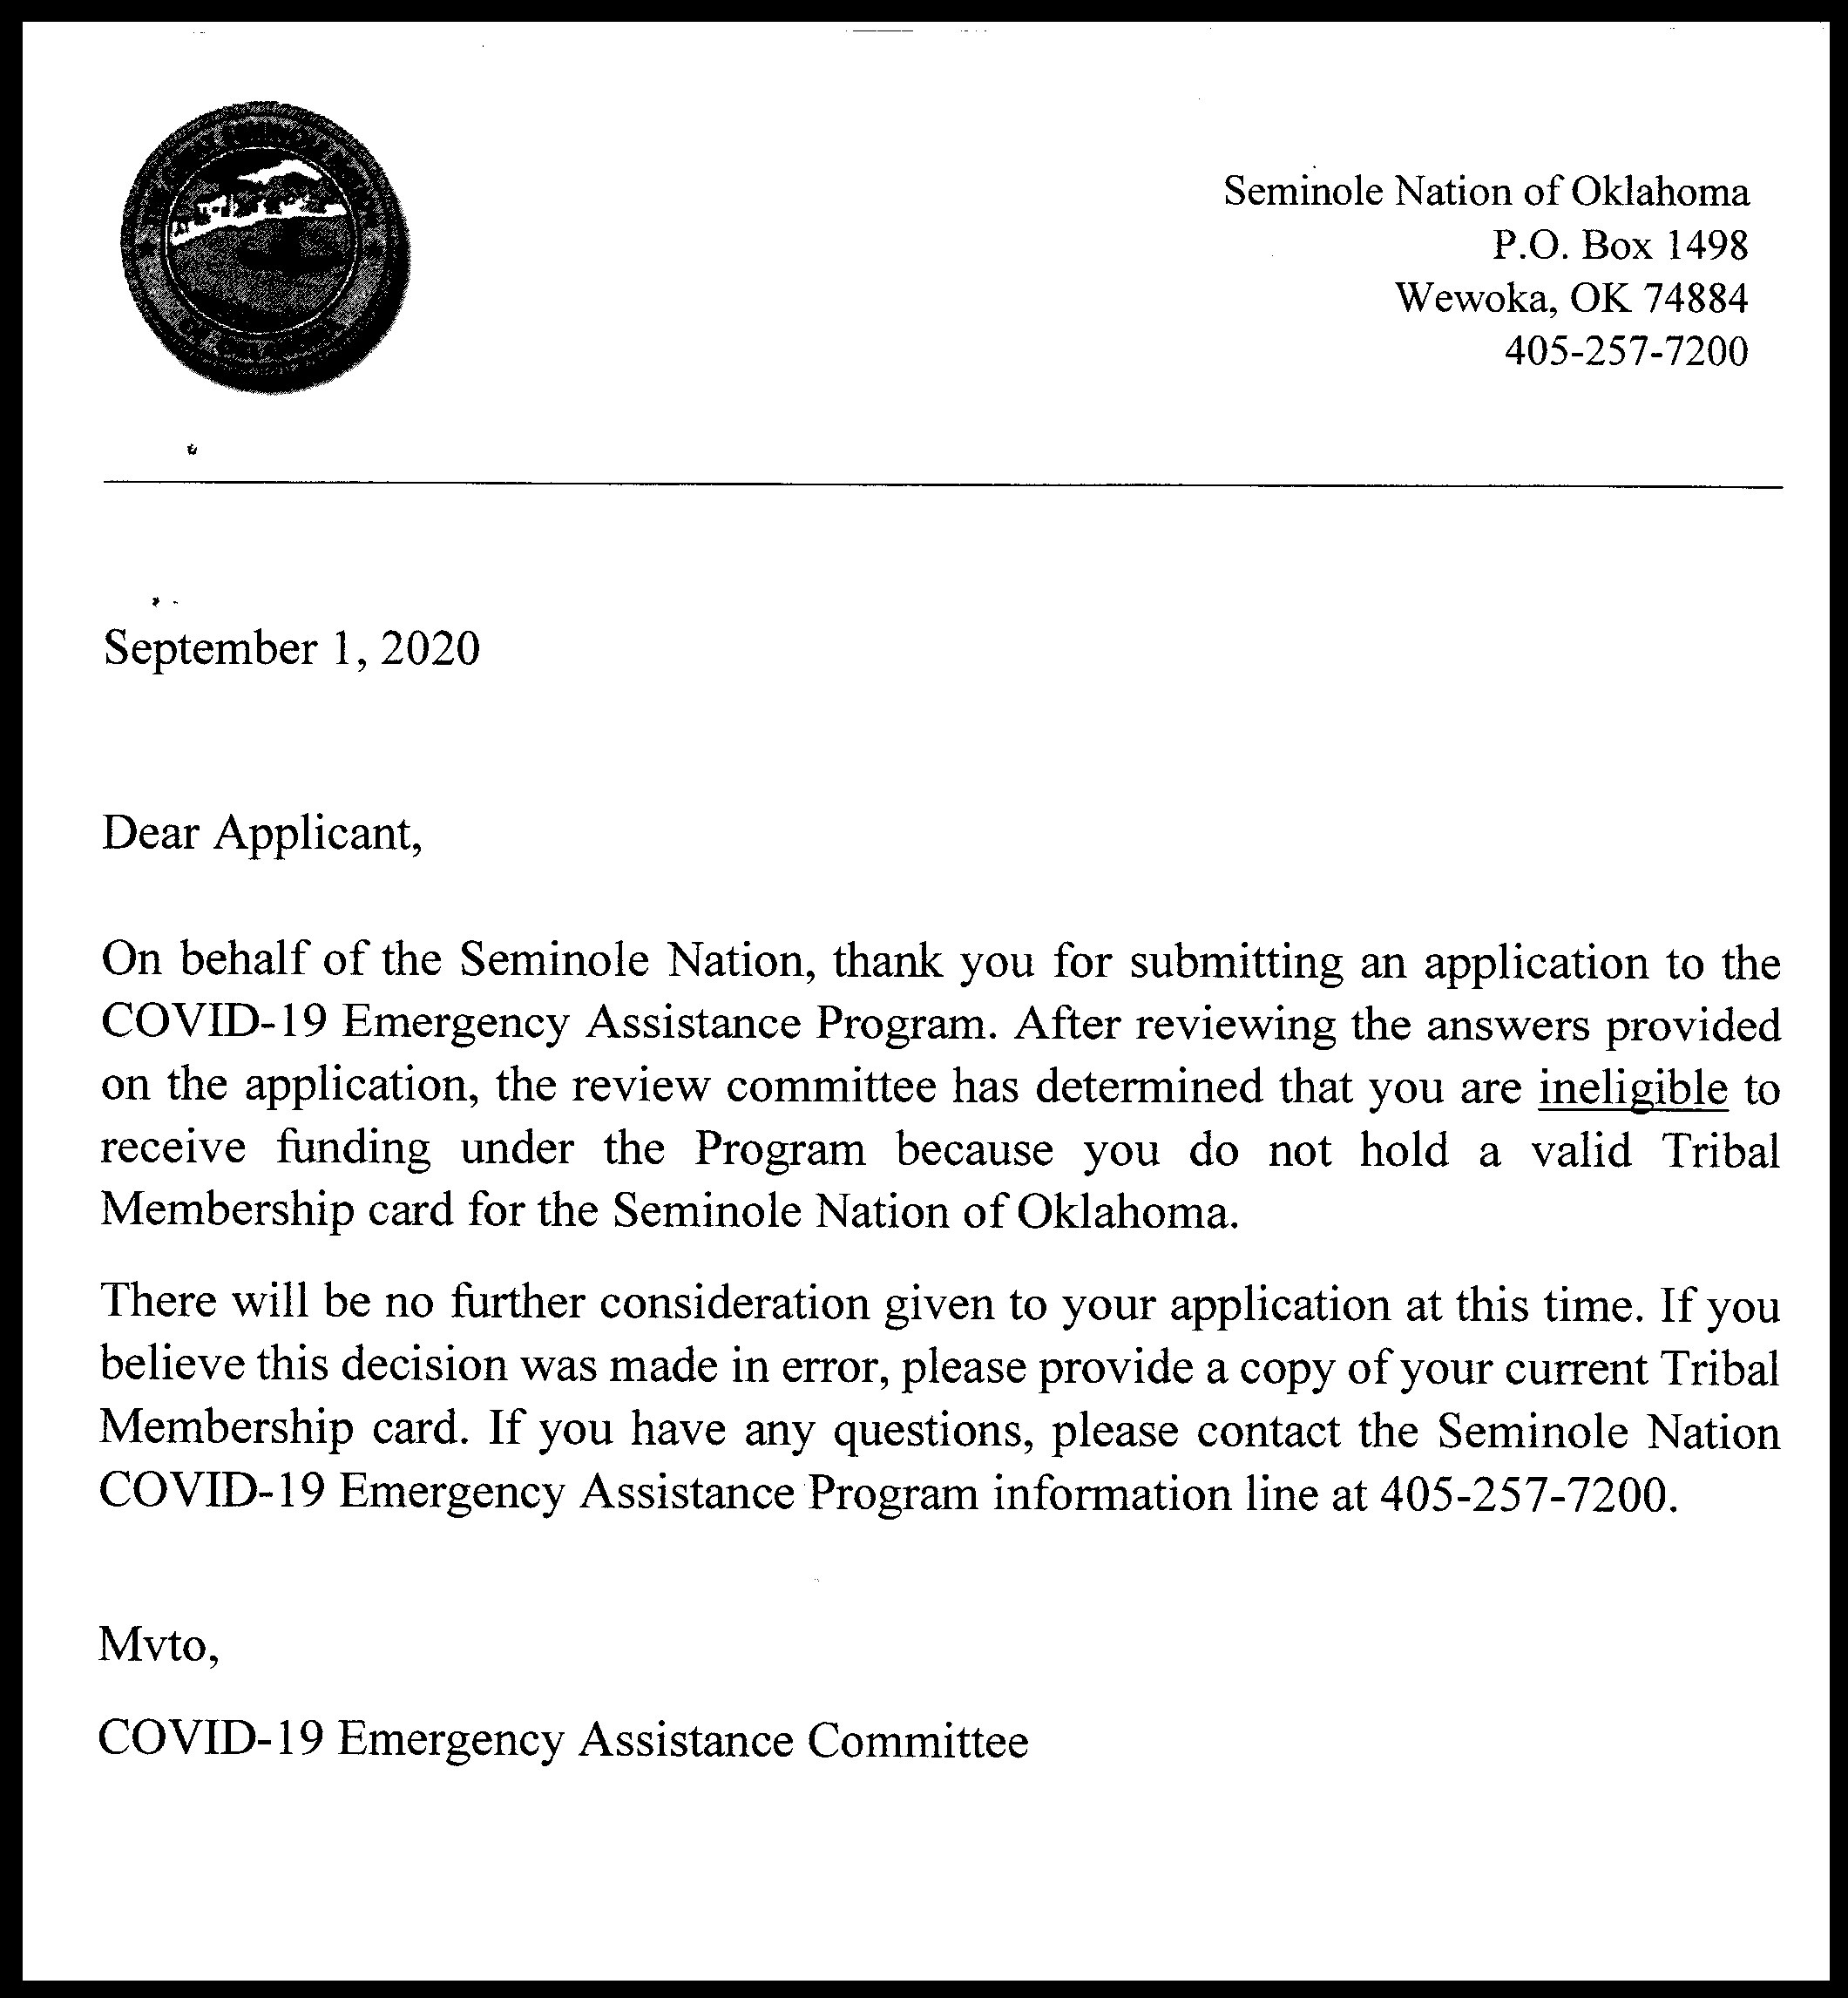 The COVID-19 Emergency Assistance Committee writes a letter, dated September 1, 2020, to an &quot;applicant&quot; that states they are ineligble to receive funding without a valid tribal membership card for the Seminole Nation